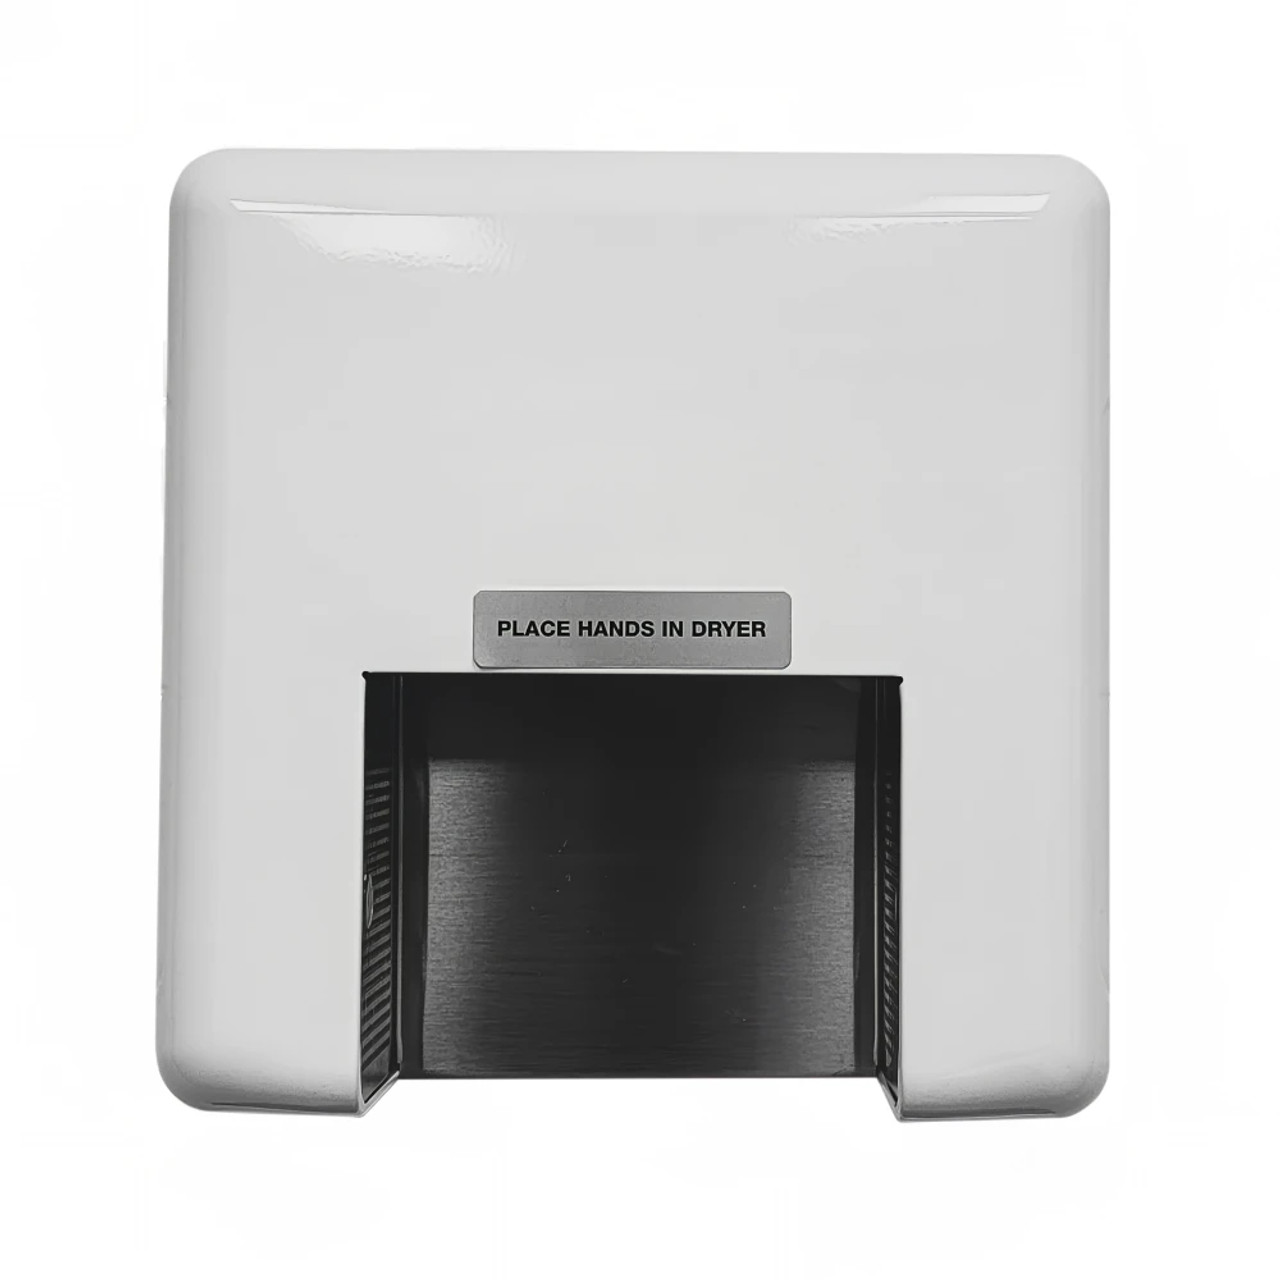 Pinnacle Dryer Automatic Hand Dryer - 15 Second Dry Time, White Stainless, 120V - Chicken Pieces